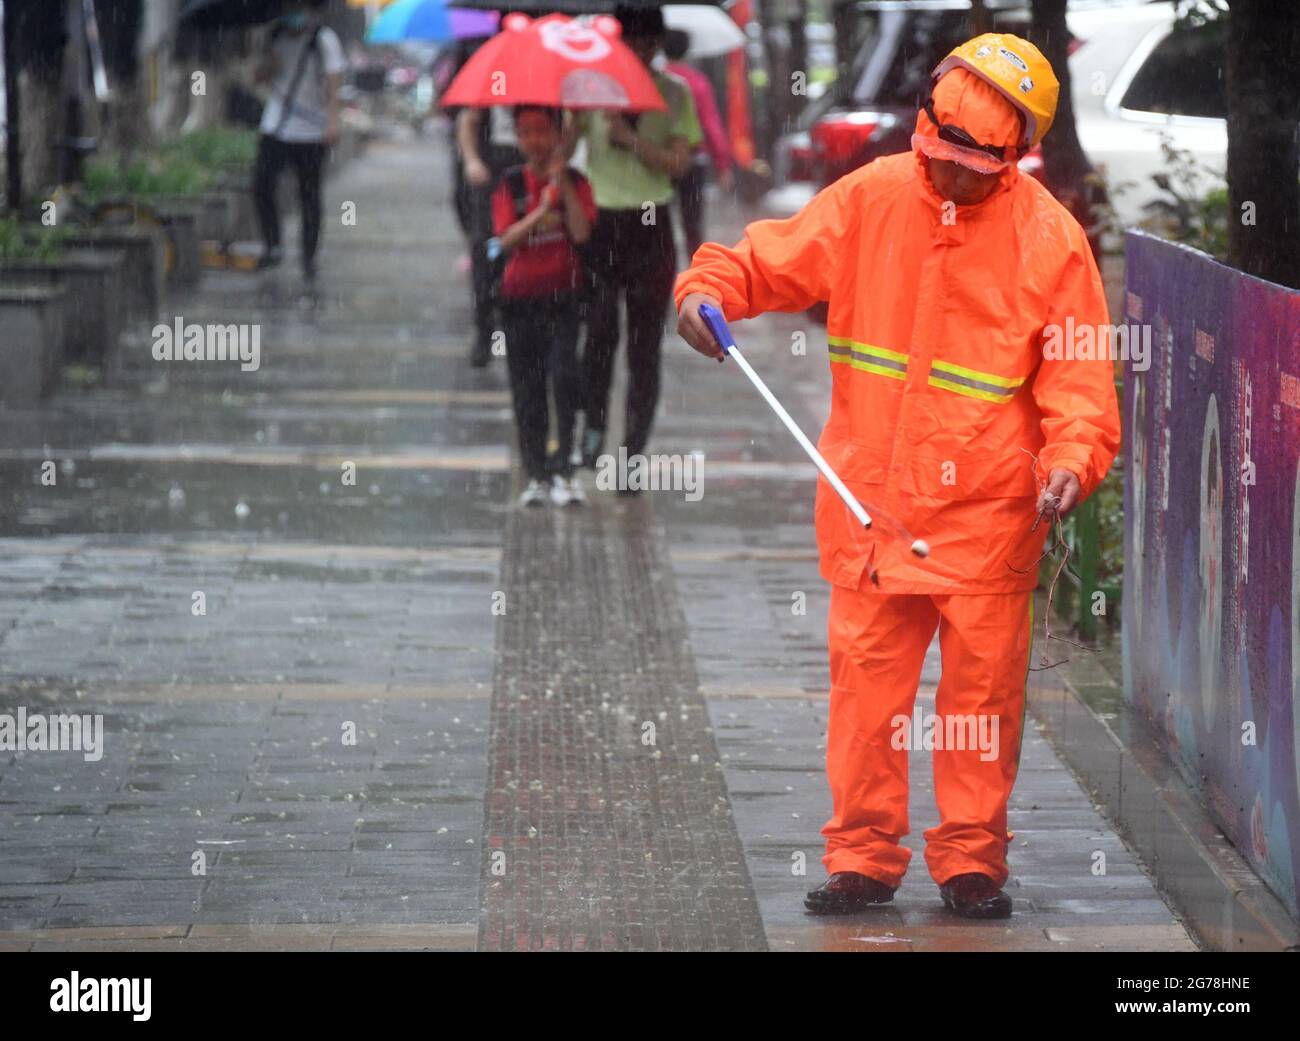 Beijing, China. 12th July, 2021. A cleaner works in rain on a street in Haidian District of Beijing, capital of China, July 12, 2021. Heavy rainstorm has lashed the Chinese capital Beijing since 6 p.m. Sunday with precipitation up to 116.4 mm, according to the municipal flood control department. From 6 p.m. Sunday to 9 a.m. Monday, Beijing registered average rainfall of 65.9 mm. Urban areas of the city reported higher average precipitation of 79.9 mm. Credit: Ren Chao/Xinhua/Alamy Live News Stock Photo